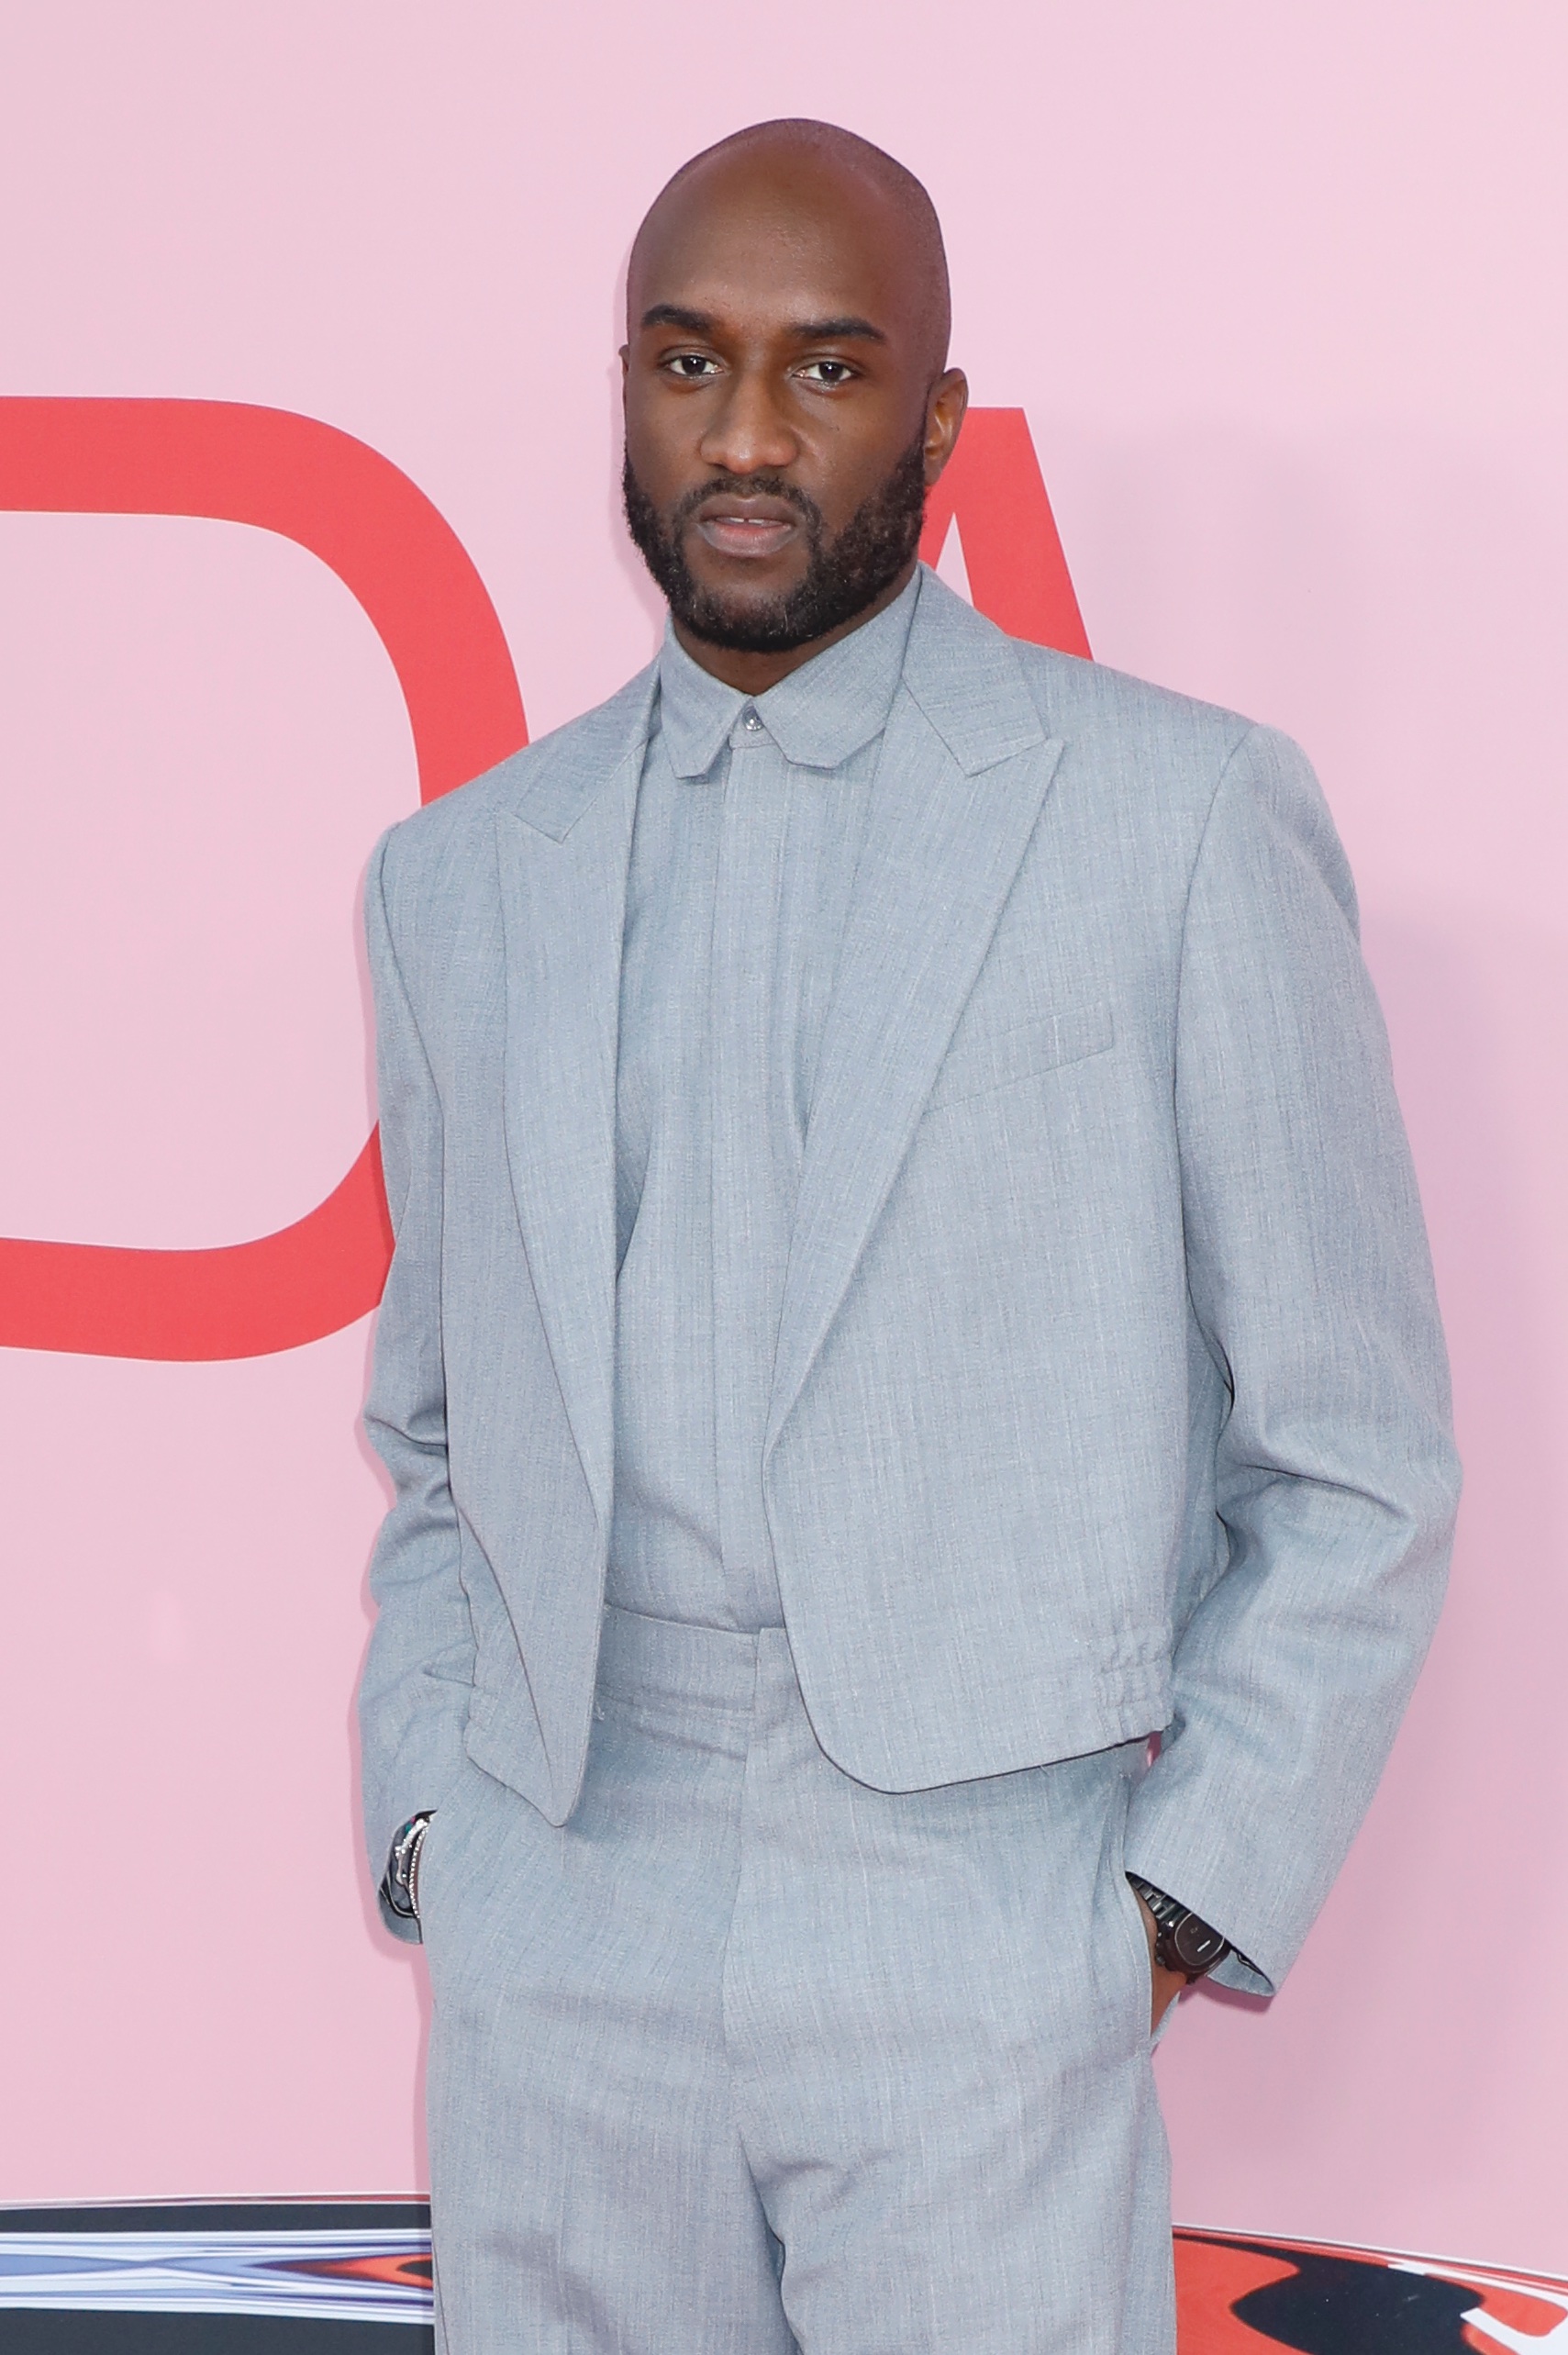 Virgil Abloh Is Many Things, But Most Important, He's a Kid From Chicago  Who Made It Big